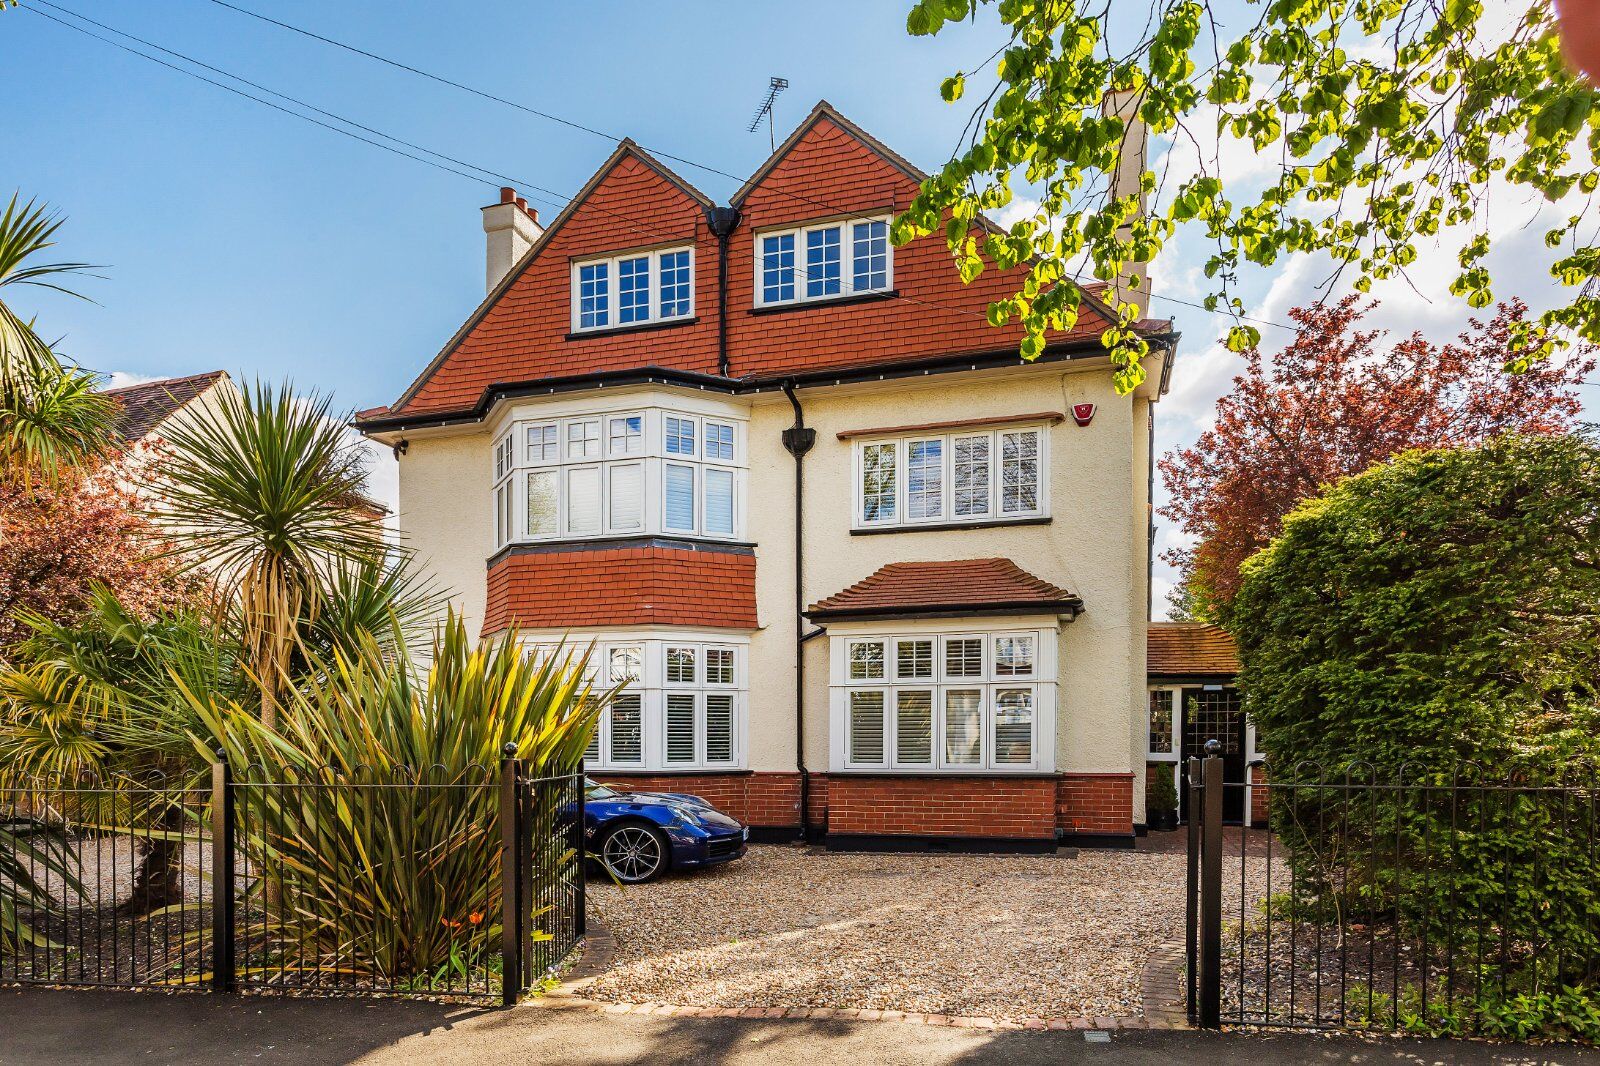 5 bedroom detached house for sale Mayfield Road, South Sutton, SM2, main image